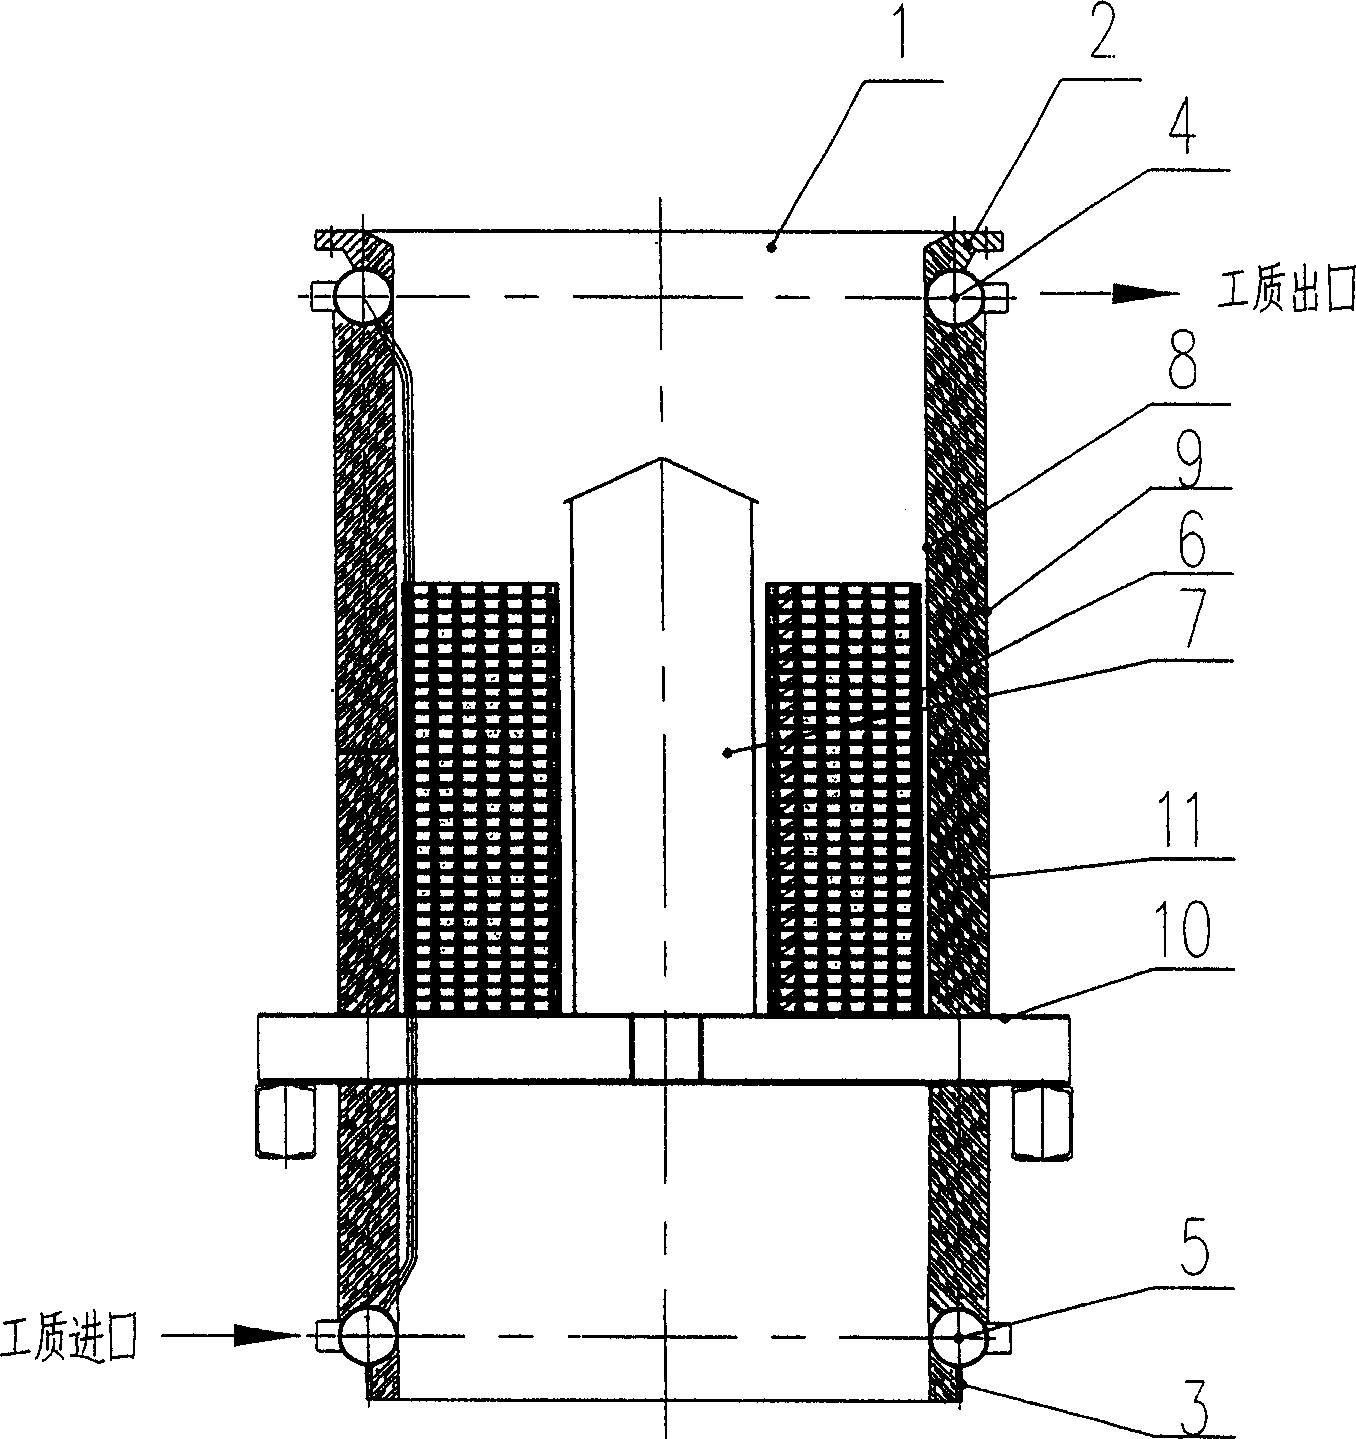 Heat exchanger with single working medium for ordinary pressure